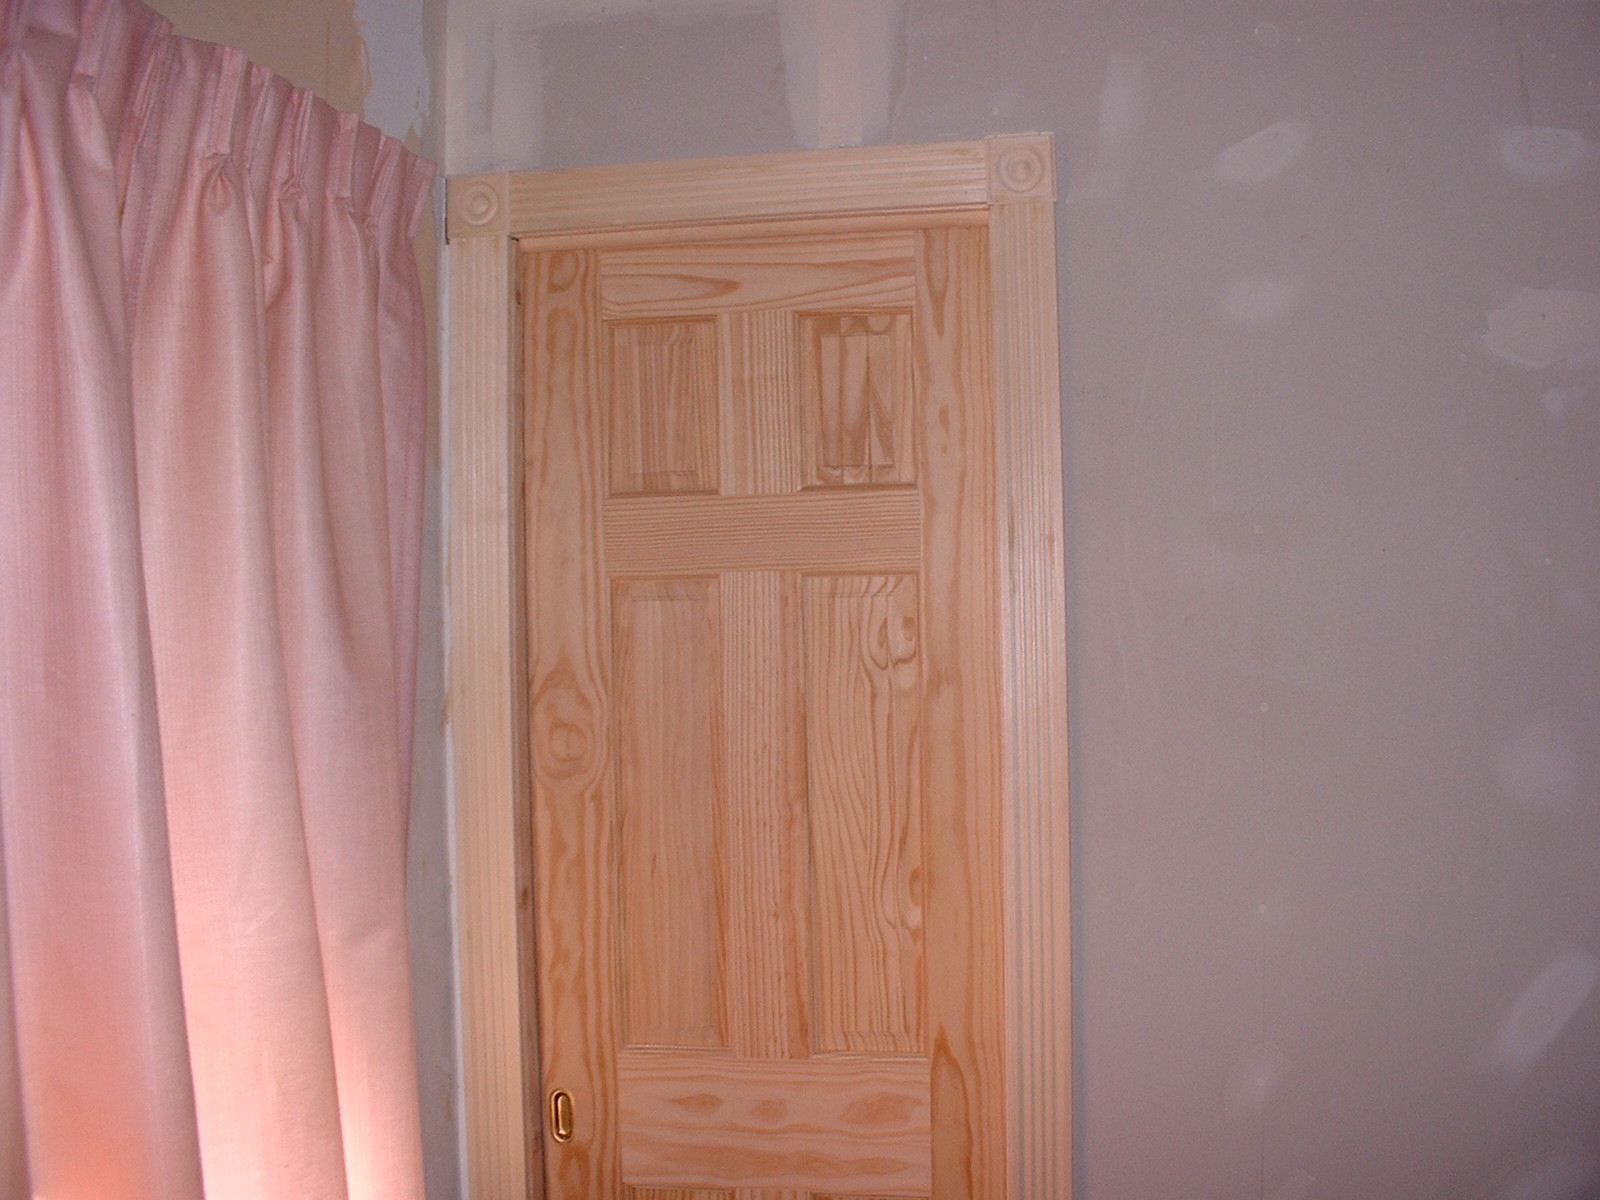 The finished door from inside the master bedroom.